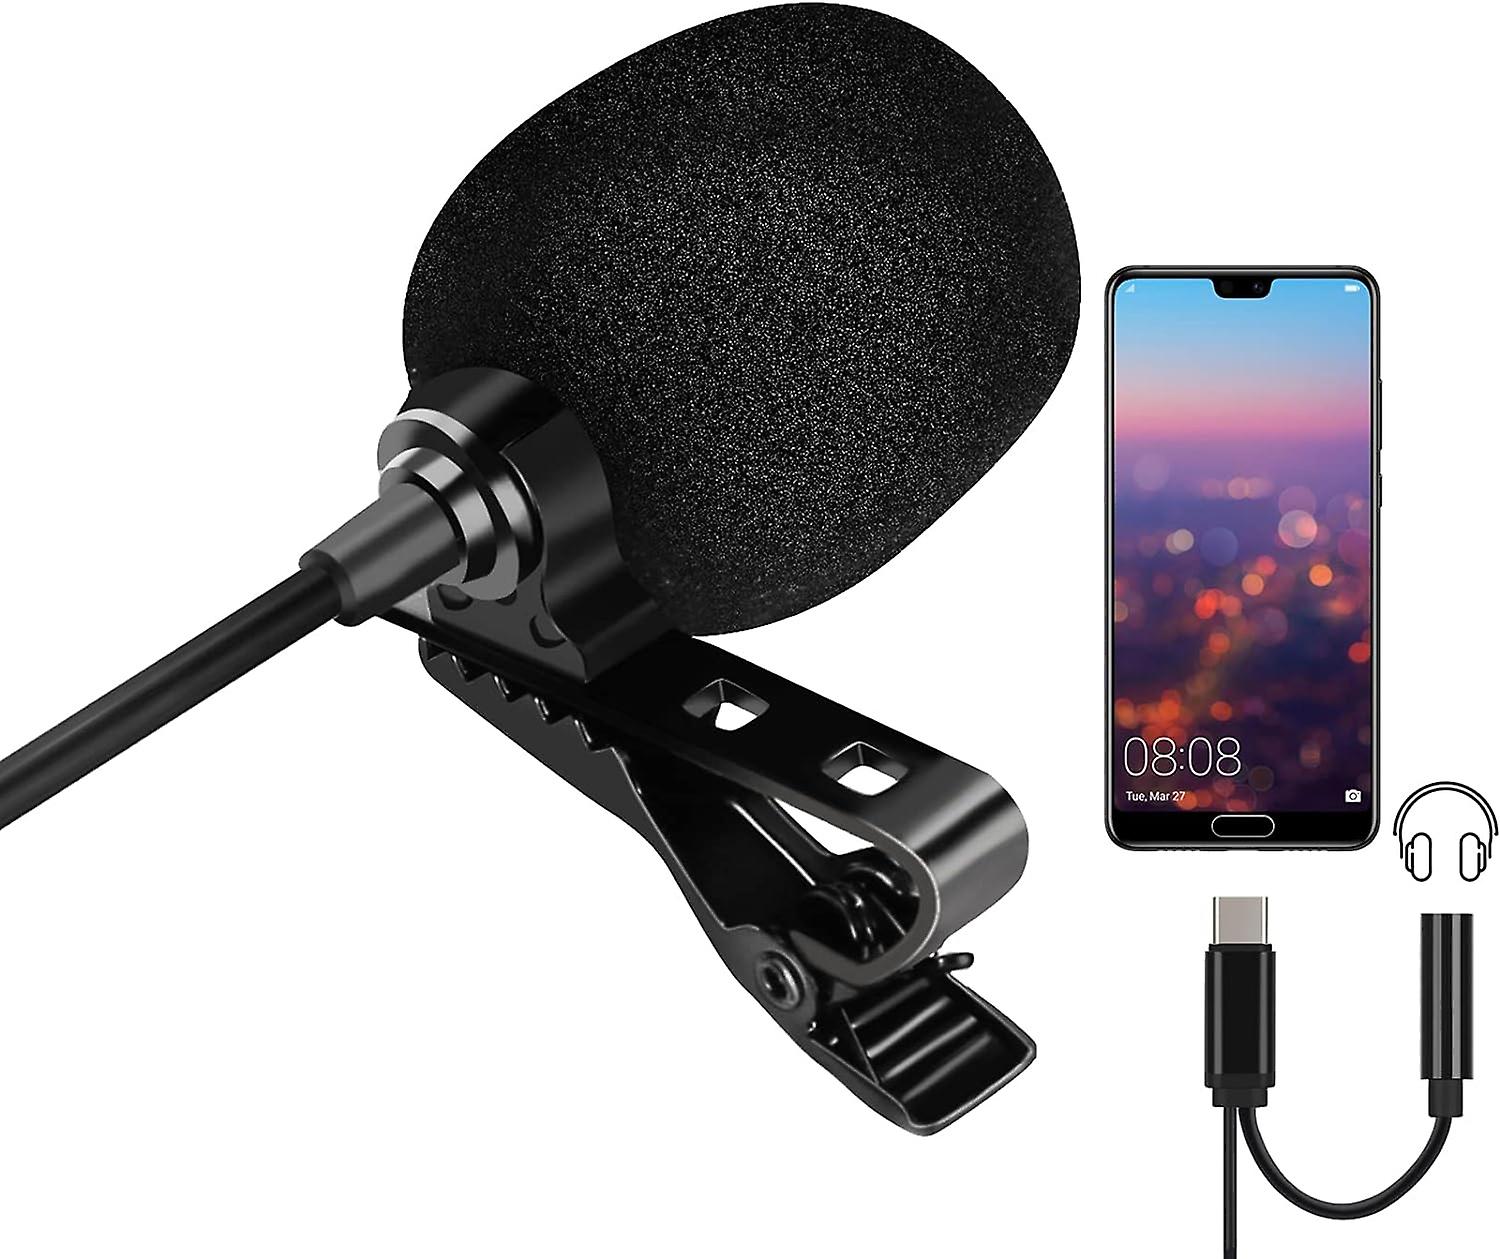 How To Use A USB Microphone With Samsung Note